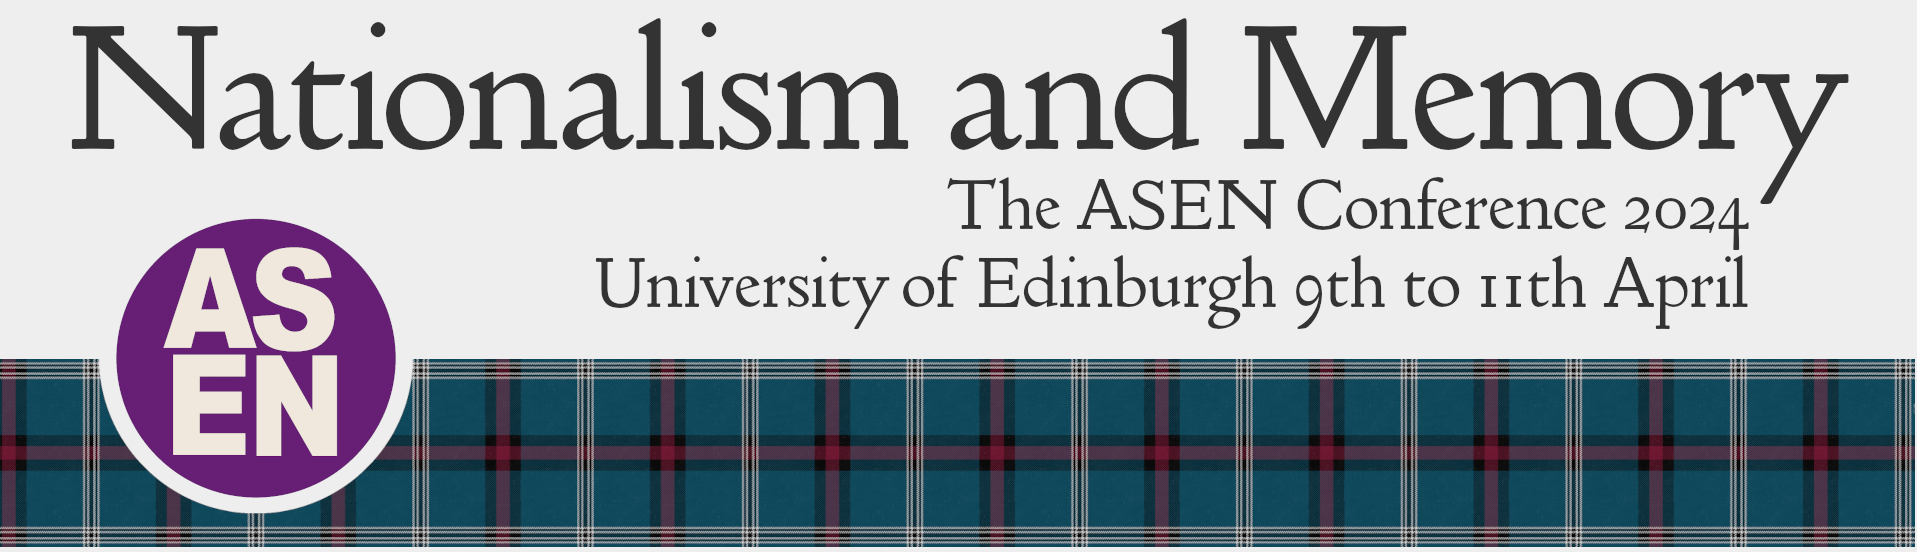 Nationalism and Memory The ASEN Conference 2024 University of Edinburgh 9th to 11th April A strip of the University of Edinburgh Tartan with a semi-circular cut-out on the left hand side with the purple ASEN logo